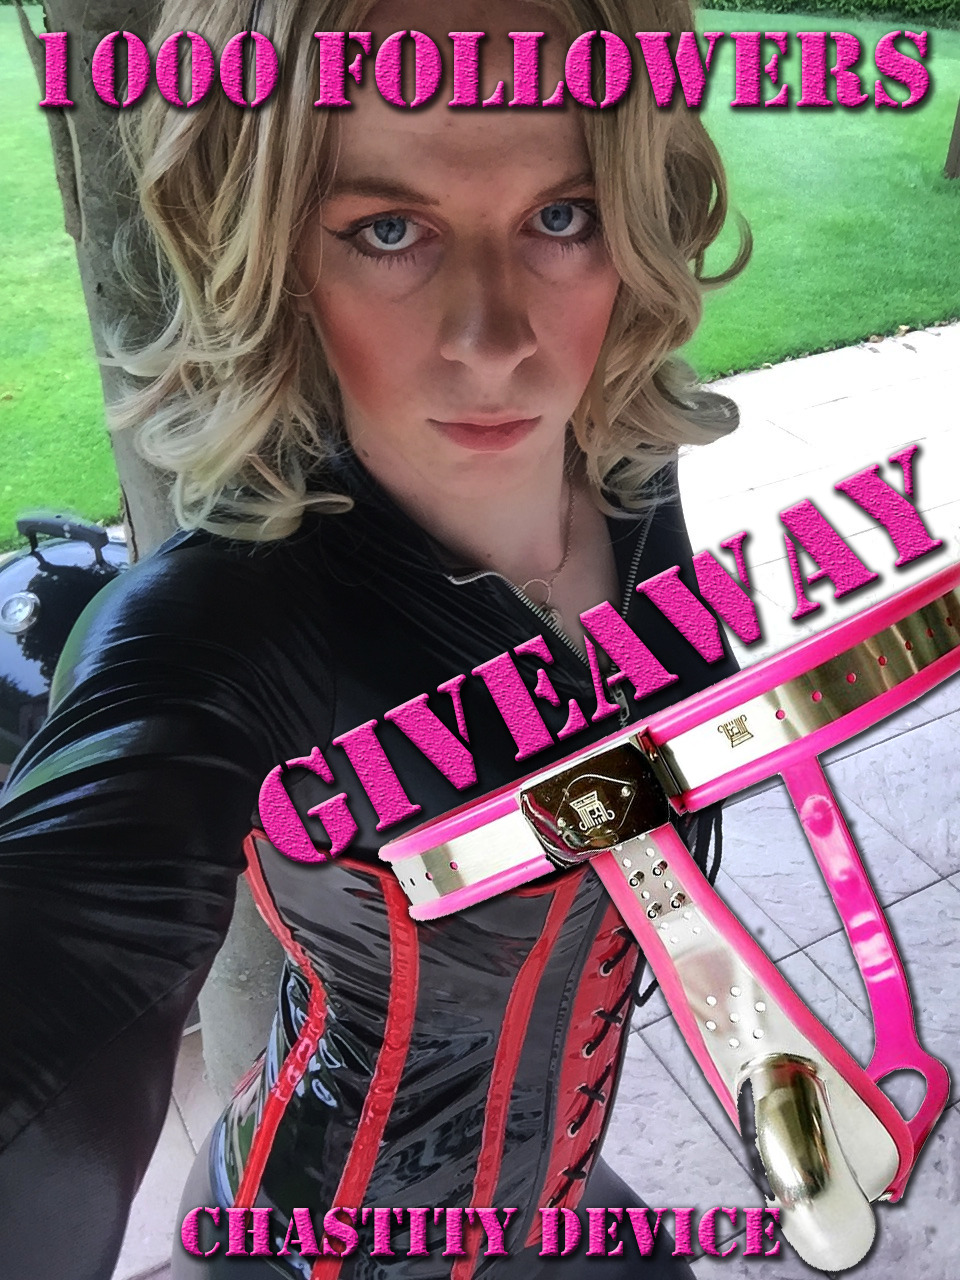 mistress-victoria-love:  Giveaway! 1000 followers Just past the 1000 followers. And